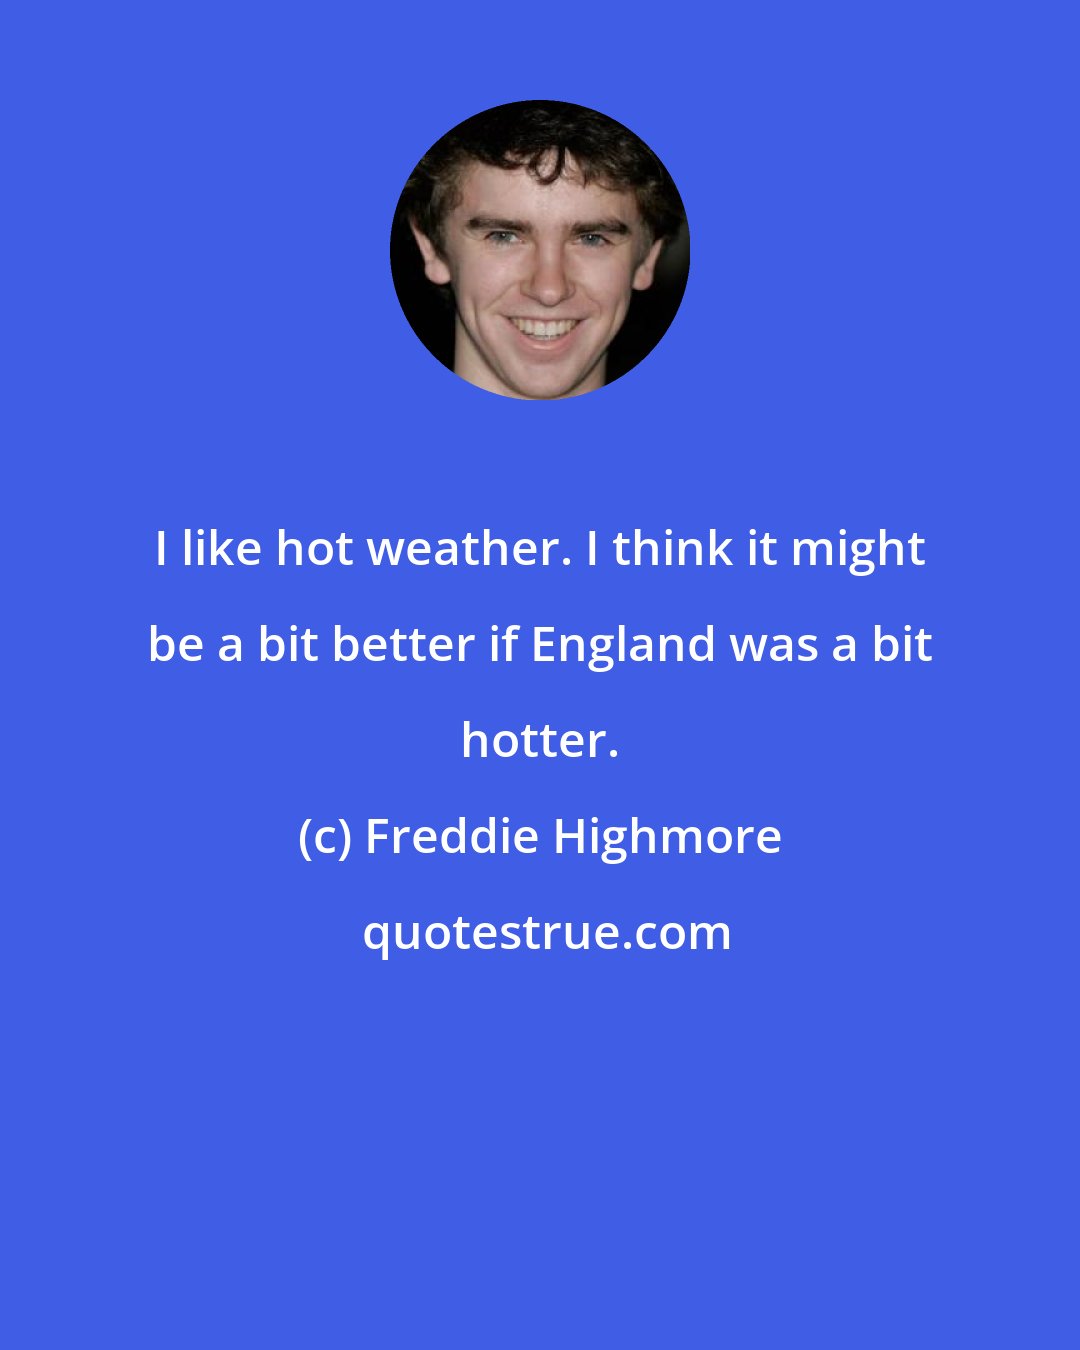 Freddie Highmore: I like hot weather. I think it might be a bit better if England was a bit hotter.